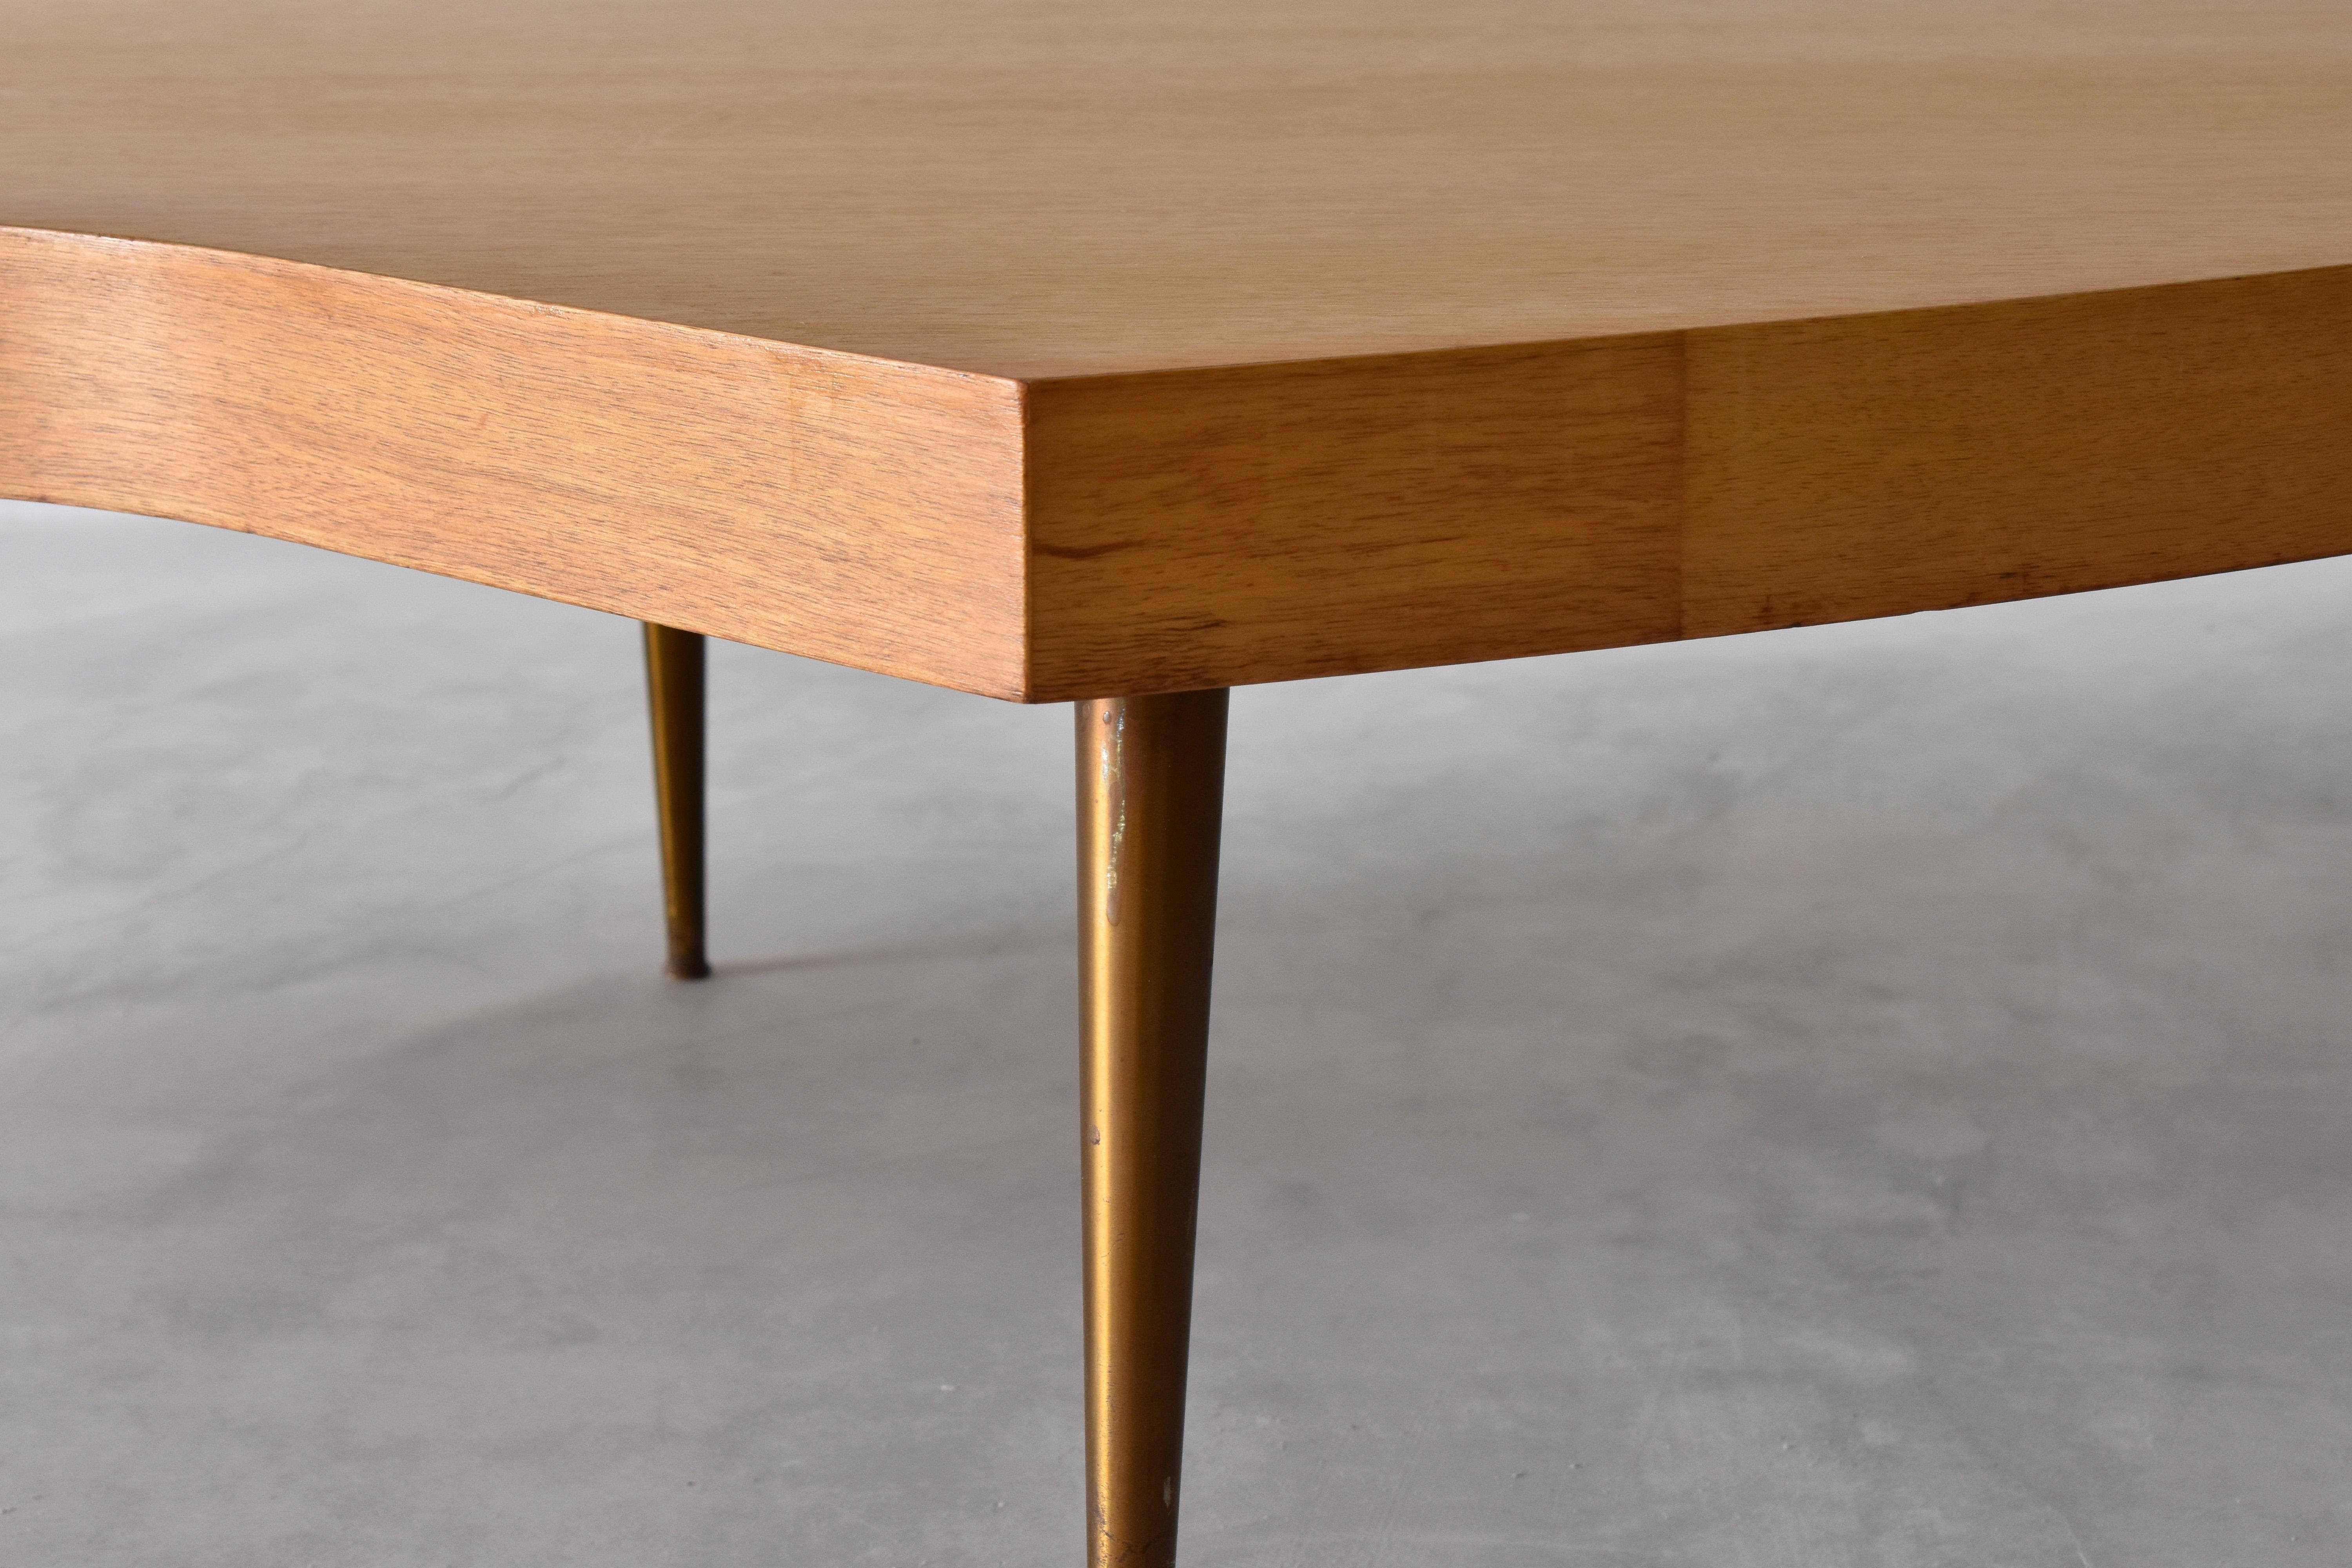 Mid-20th Century Modernist Free-Form Coffee or Cocktail Table, Oak, Brass Legs, America, 1950s